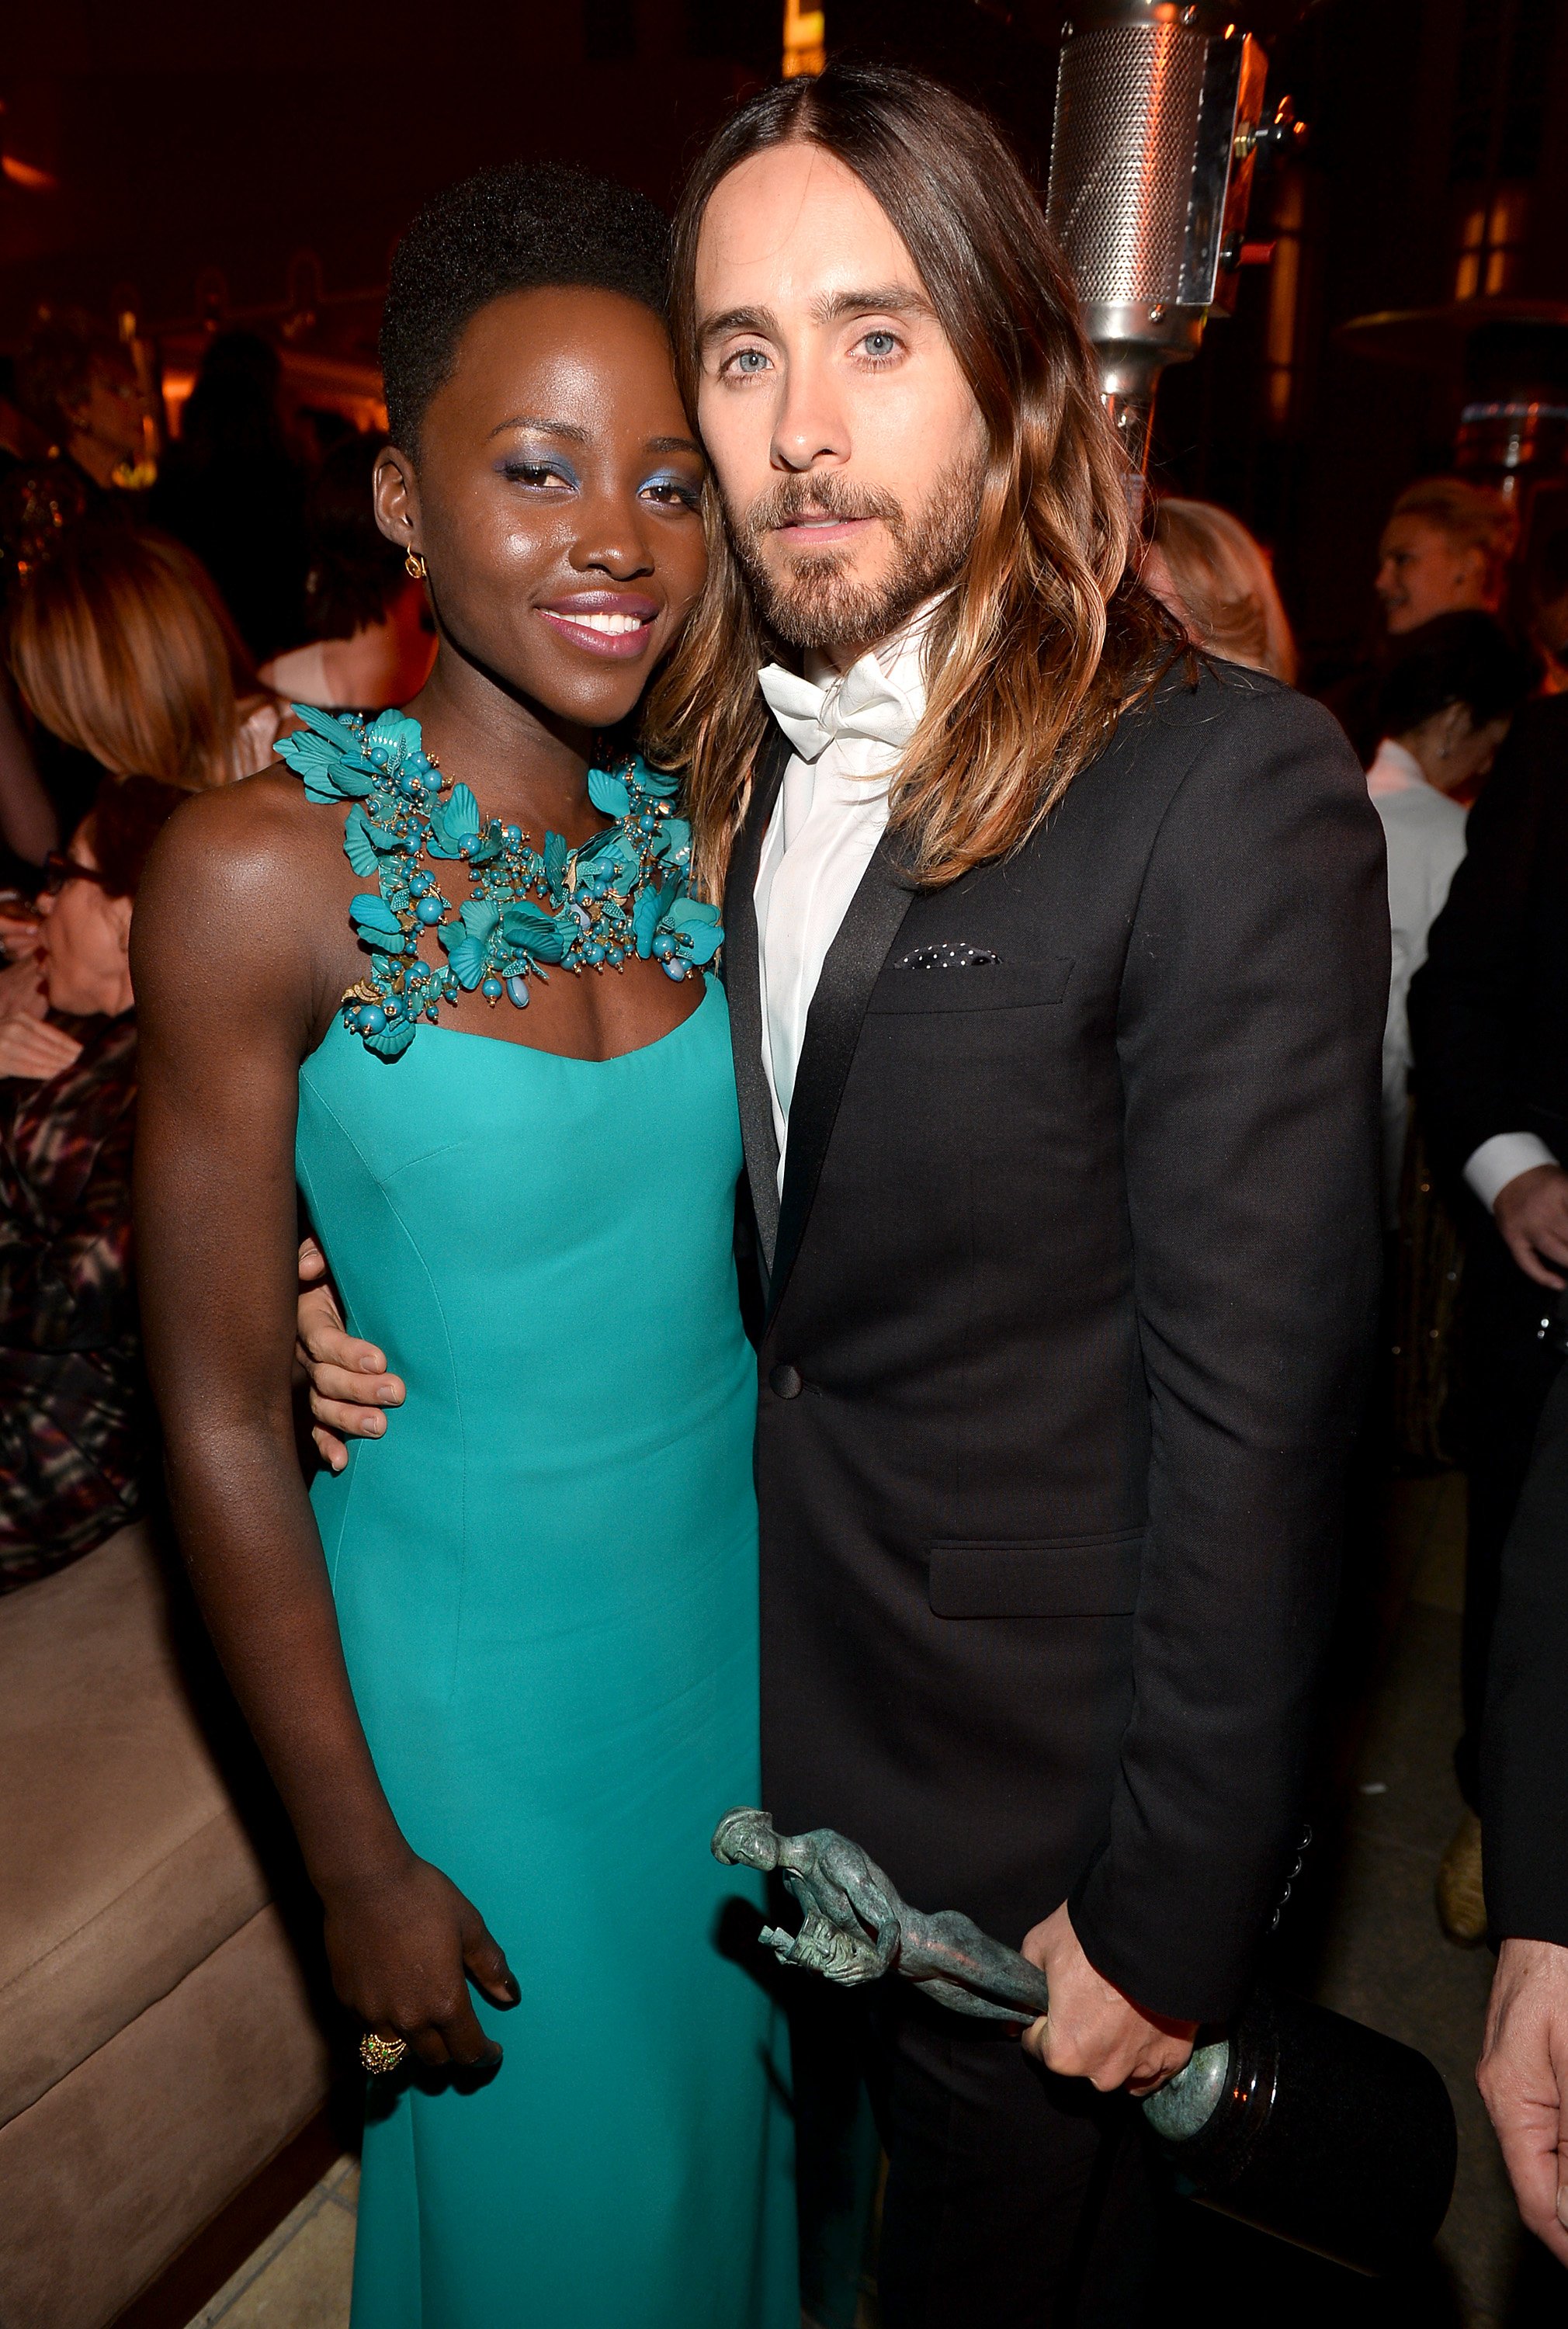 Lupita Nyong'o and Jared Leto at the Weinstein Company & Netflix's SAG after party on January 18, 2014 | Source: Getty Images